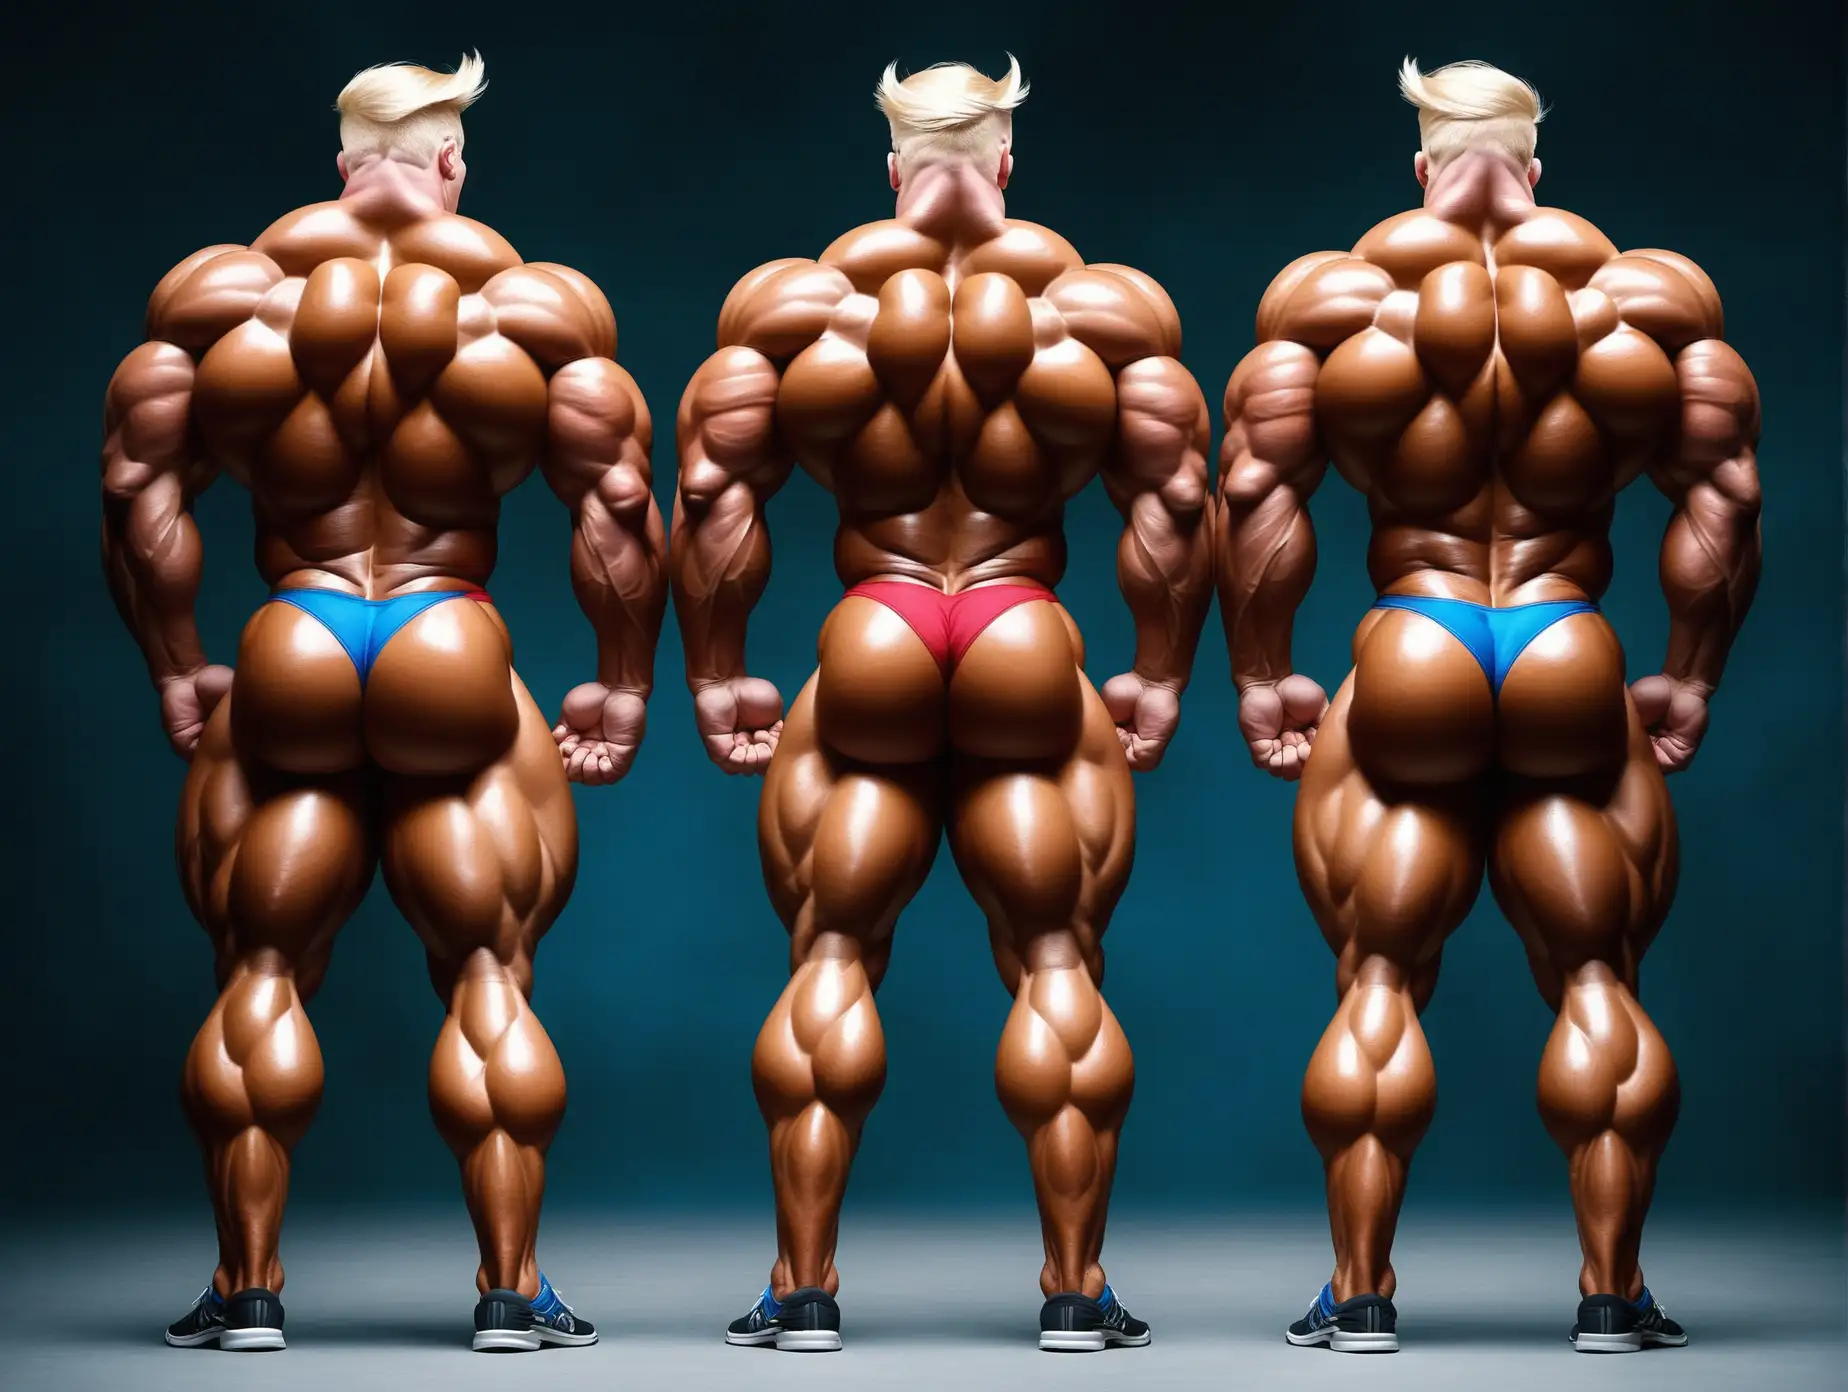 Fantasy Bodybuilders with Oversized Muscles Flexing